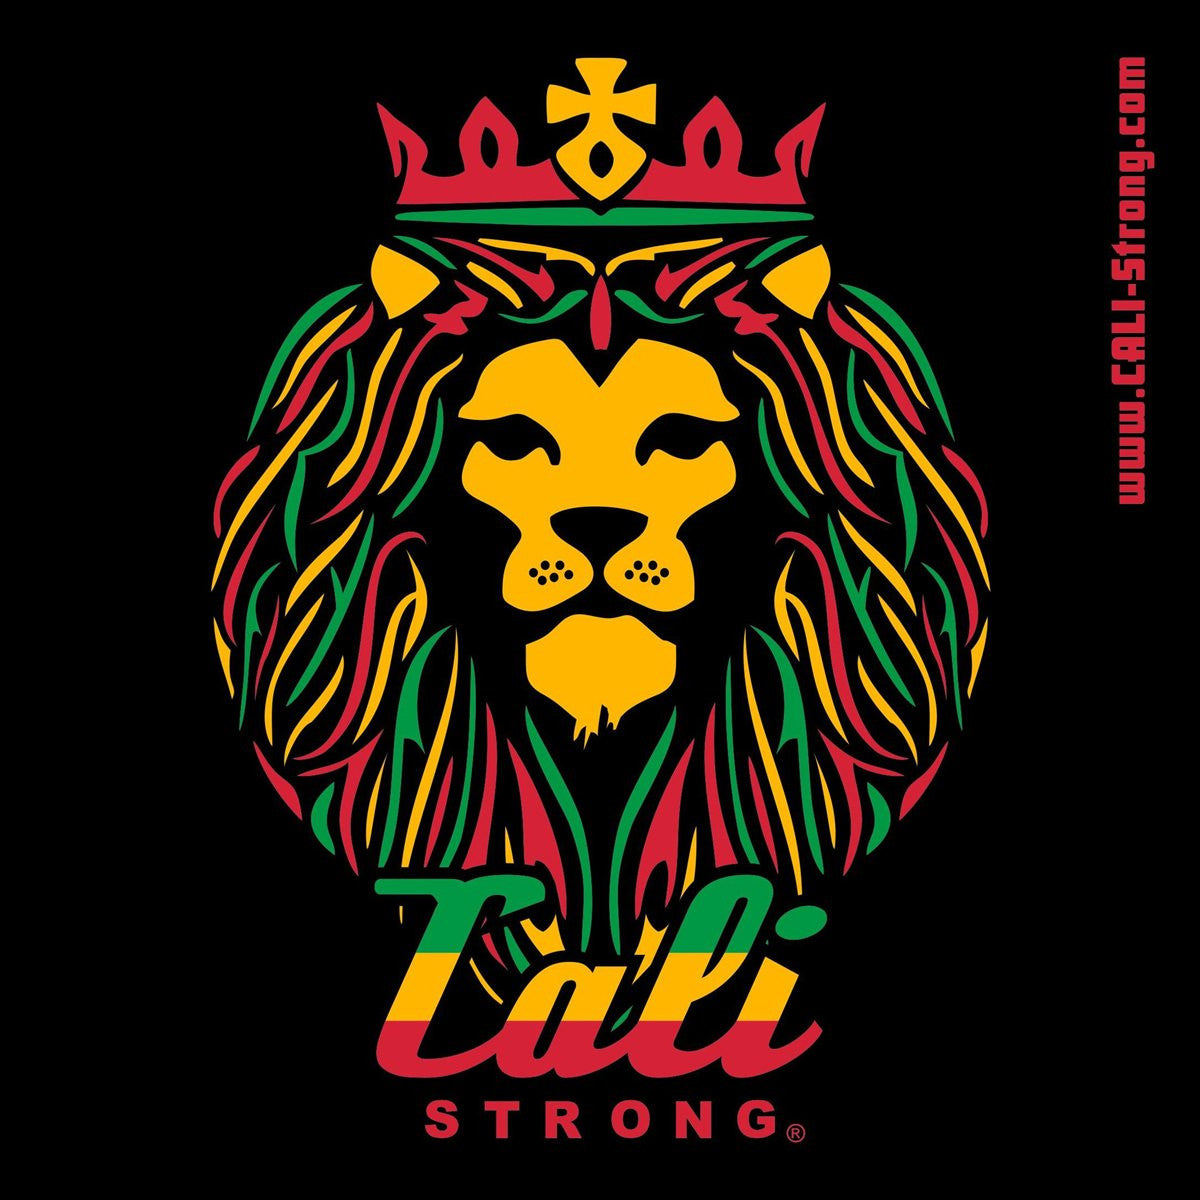 CALI Strong King Rasta Sticker 4 inch Square Vinyl Decal - Stickers - Image 1 - CALI Strong